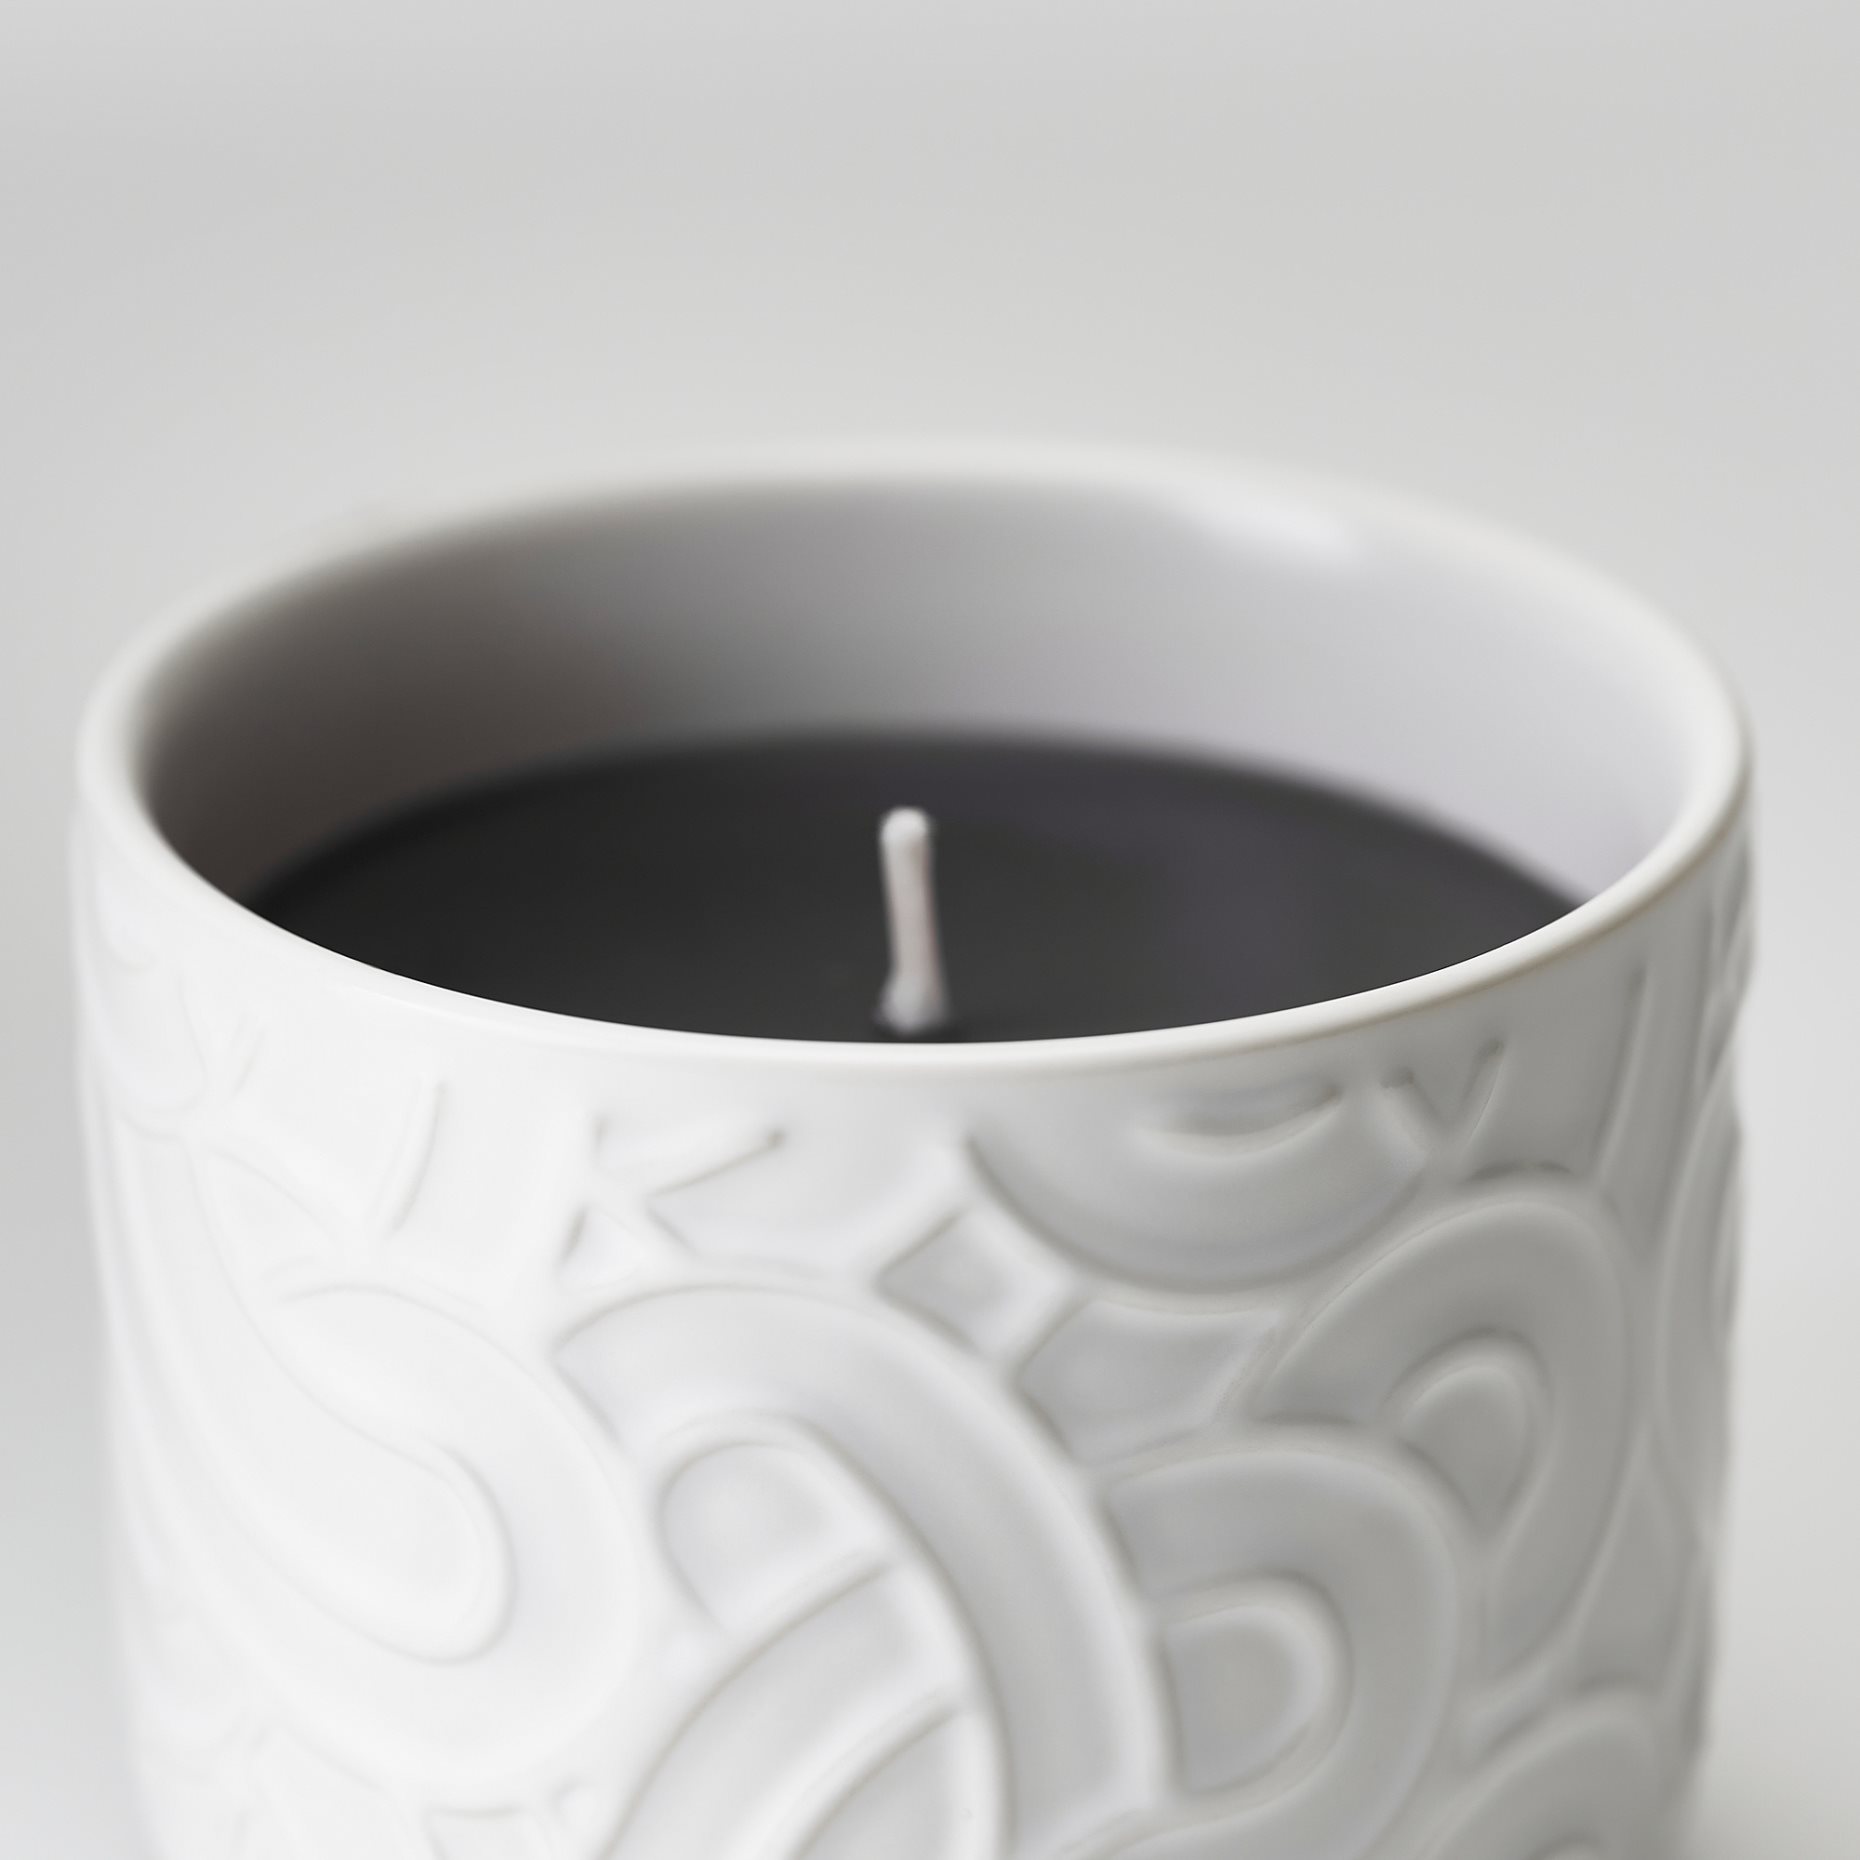 SOTRONN, scented candle in ceramic jar/red berries & vanilla, 25 hr, 805.623.79